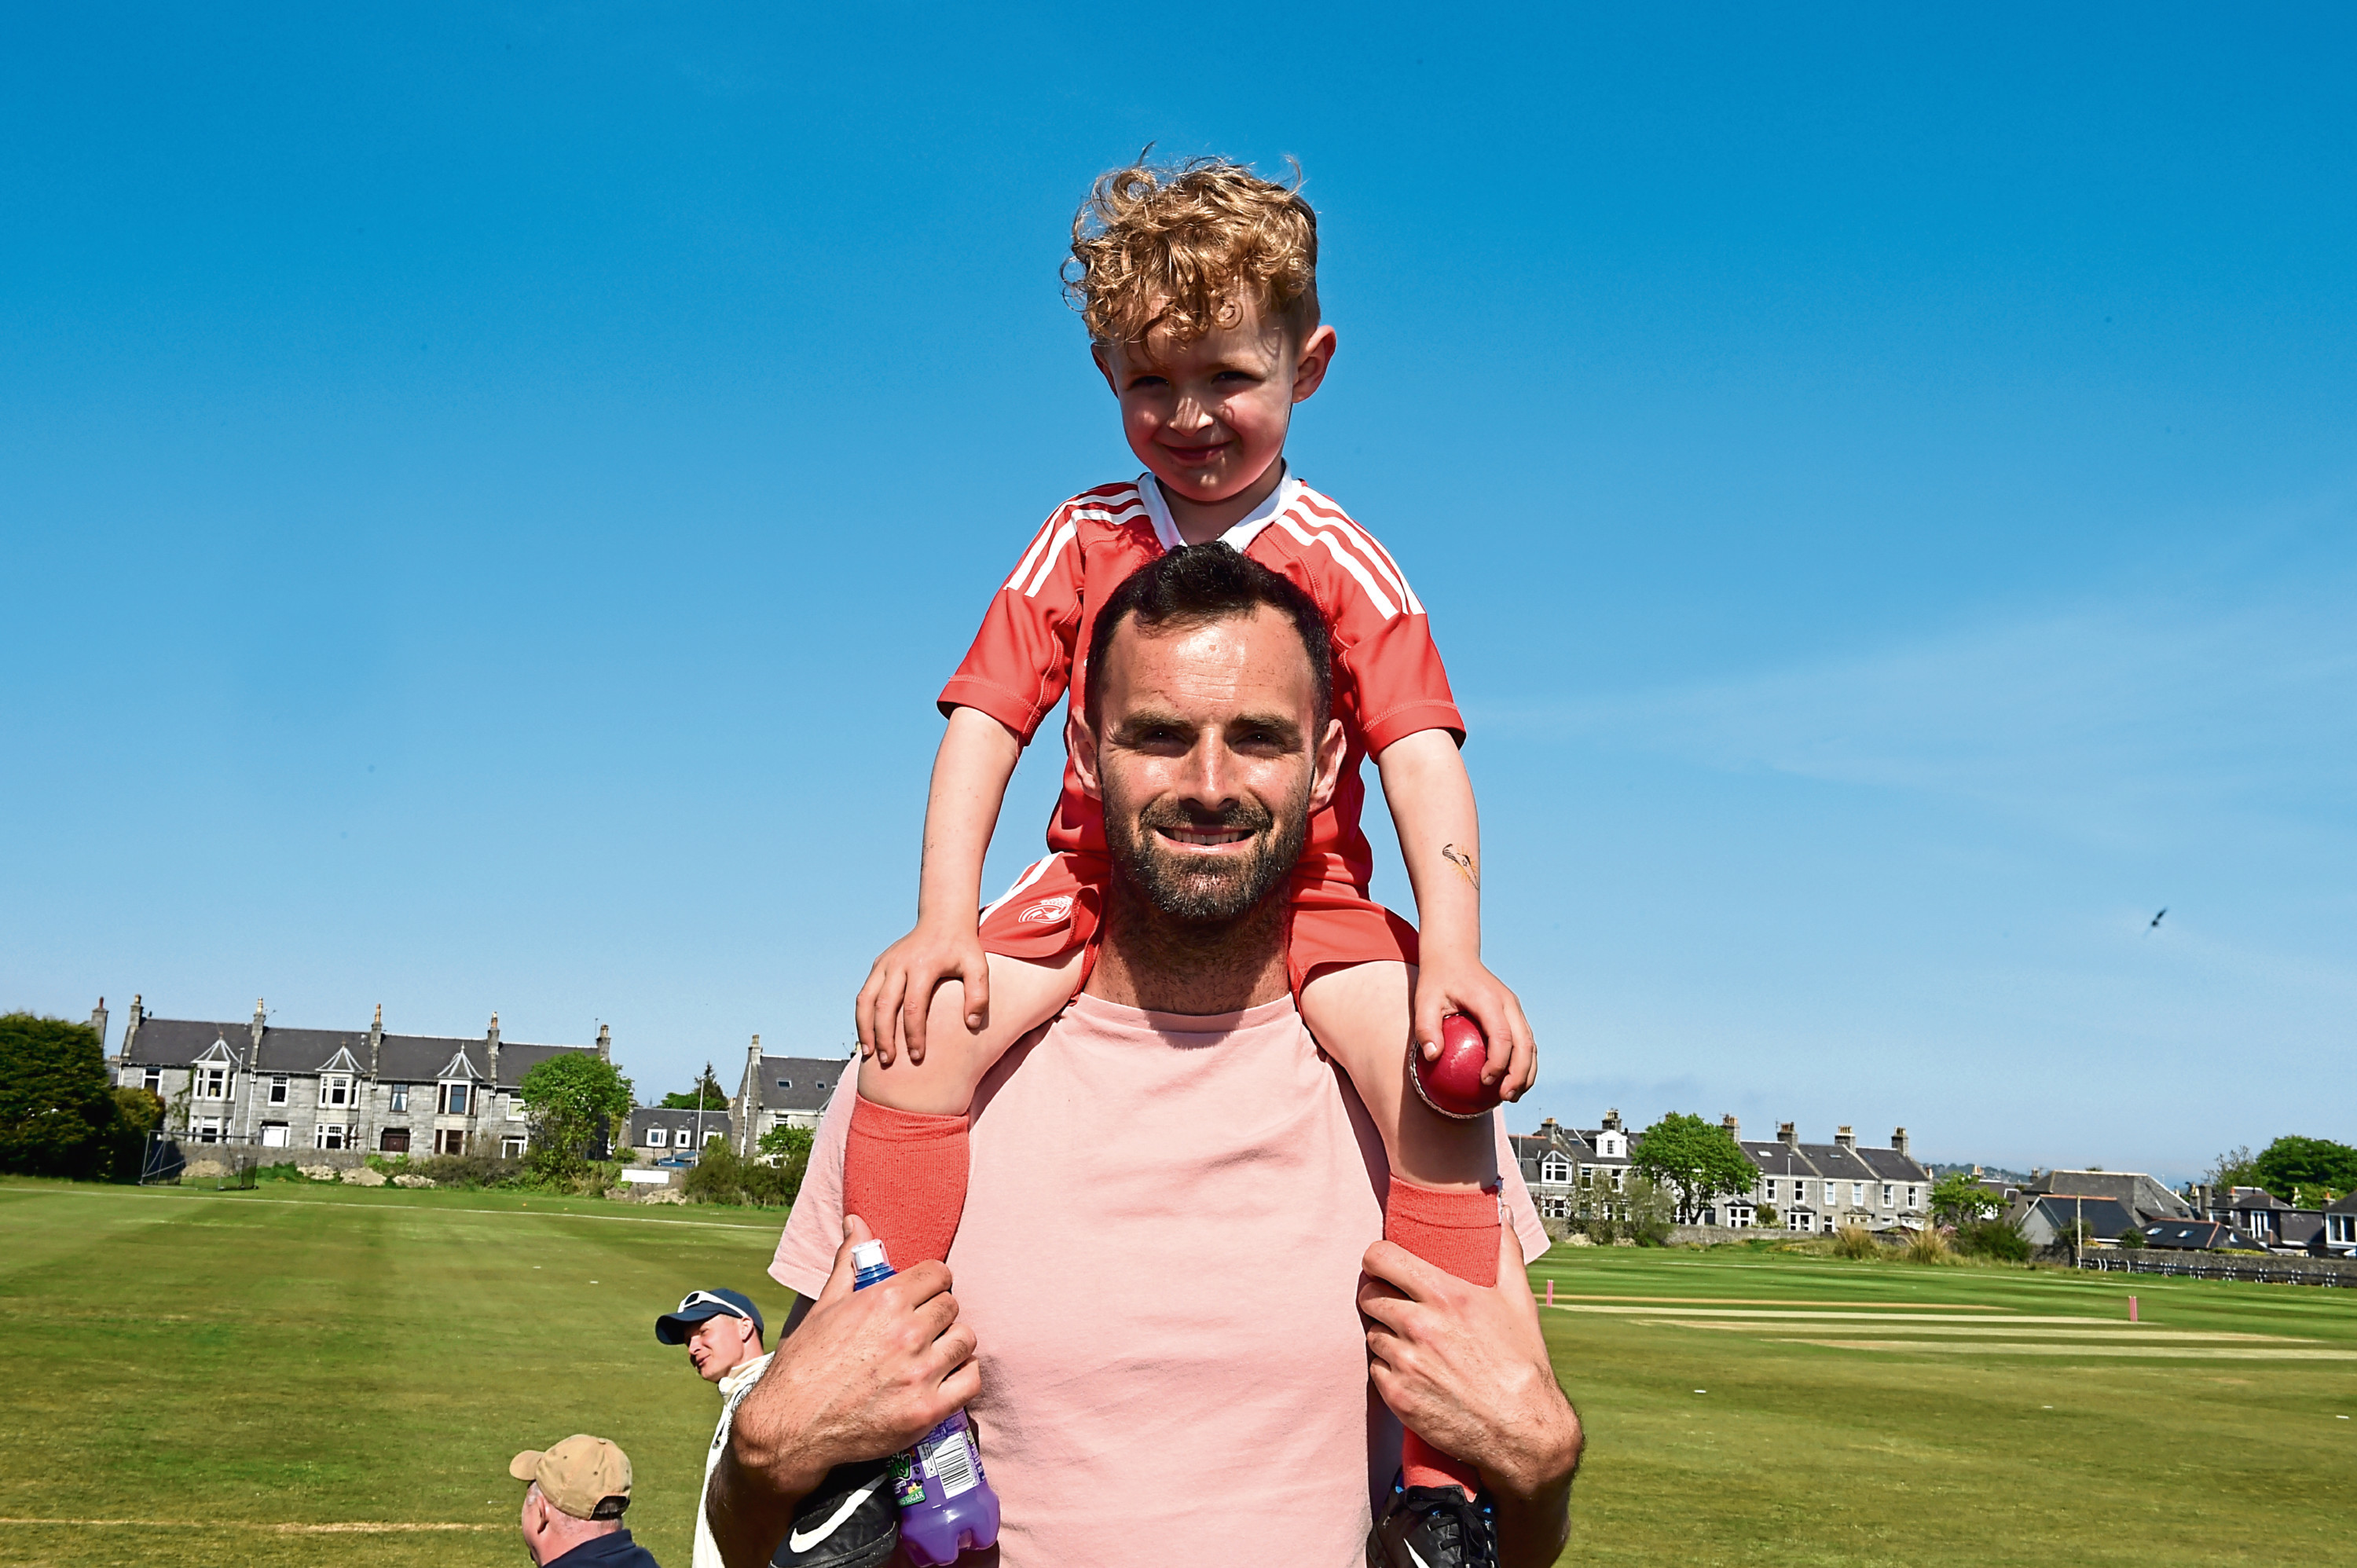 Aberdeen Fc goalkeeper, Joe Lewis with his son, Lenny at Mannofield cricket, Aberdeen.  
Picture by Jim Irvine  26-5-18